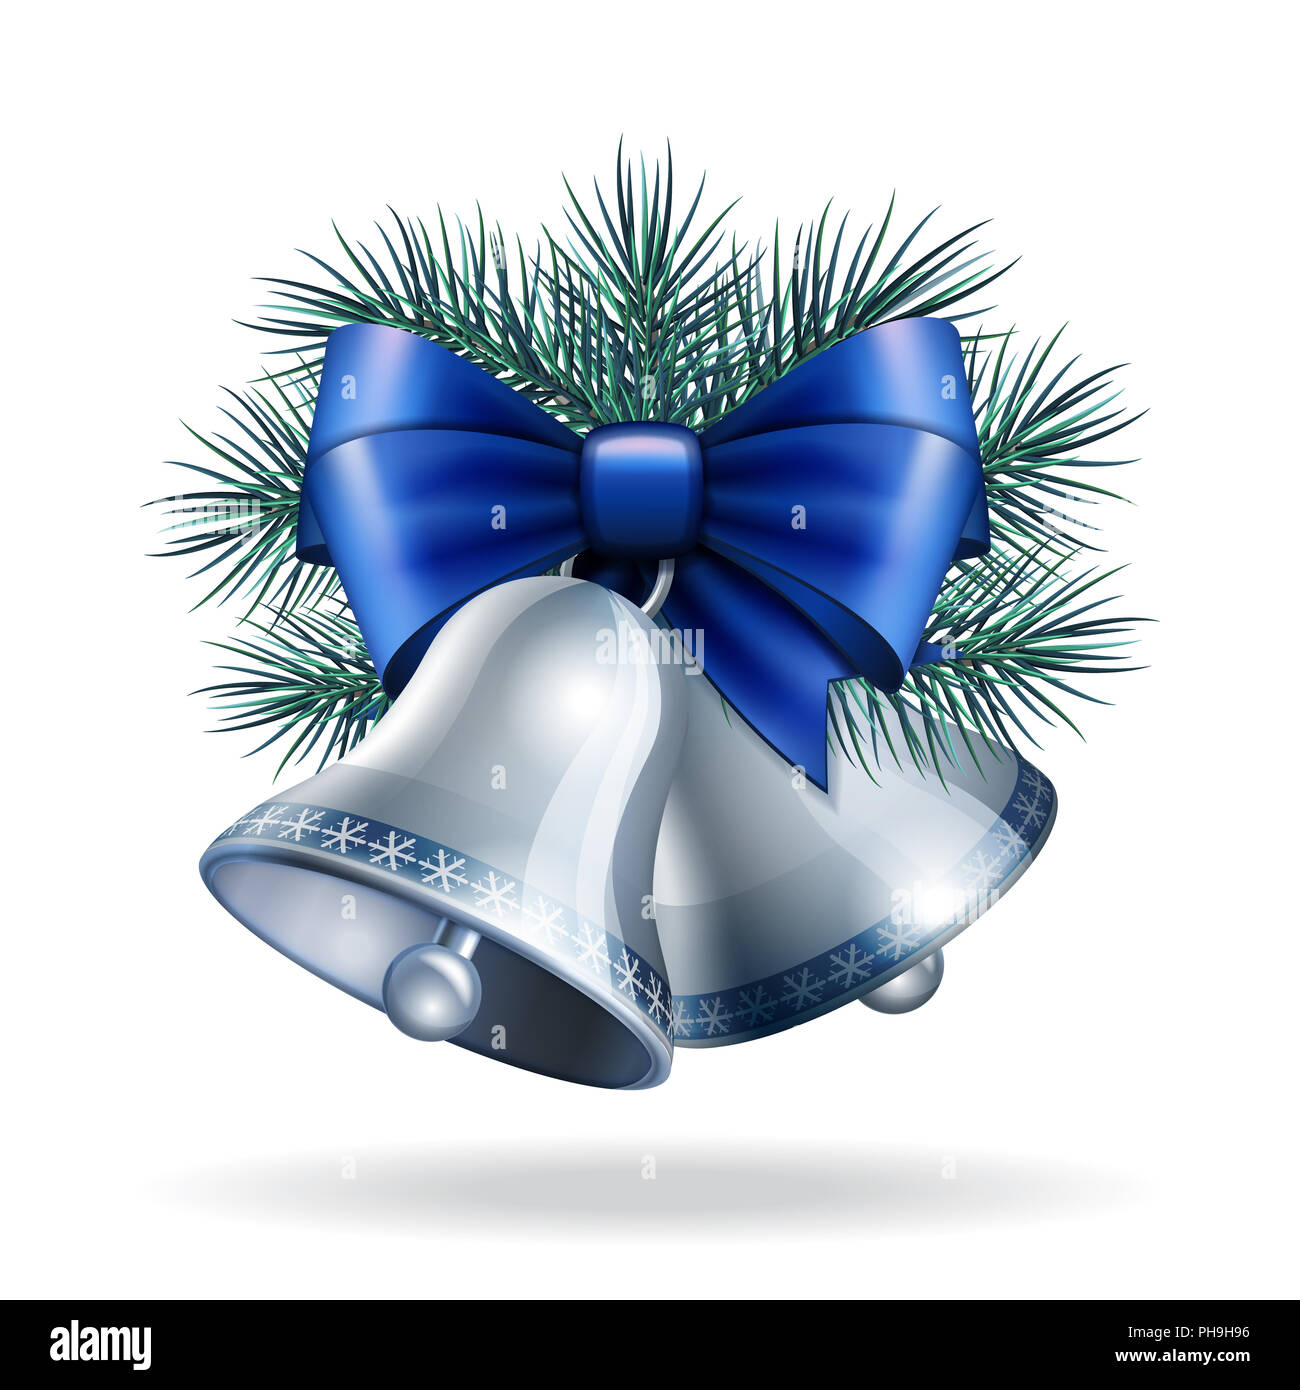 Blue ribbons with bow Stock Photo - Alamy